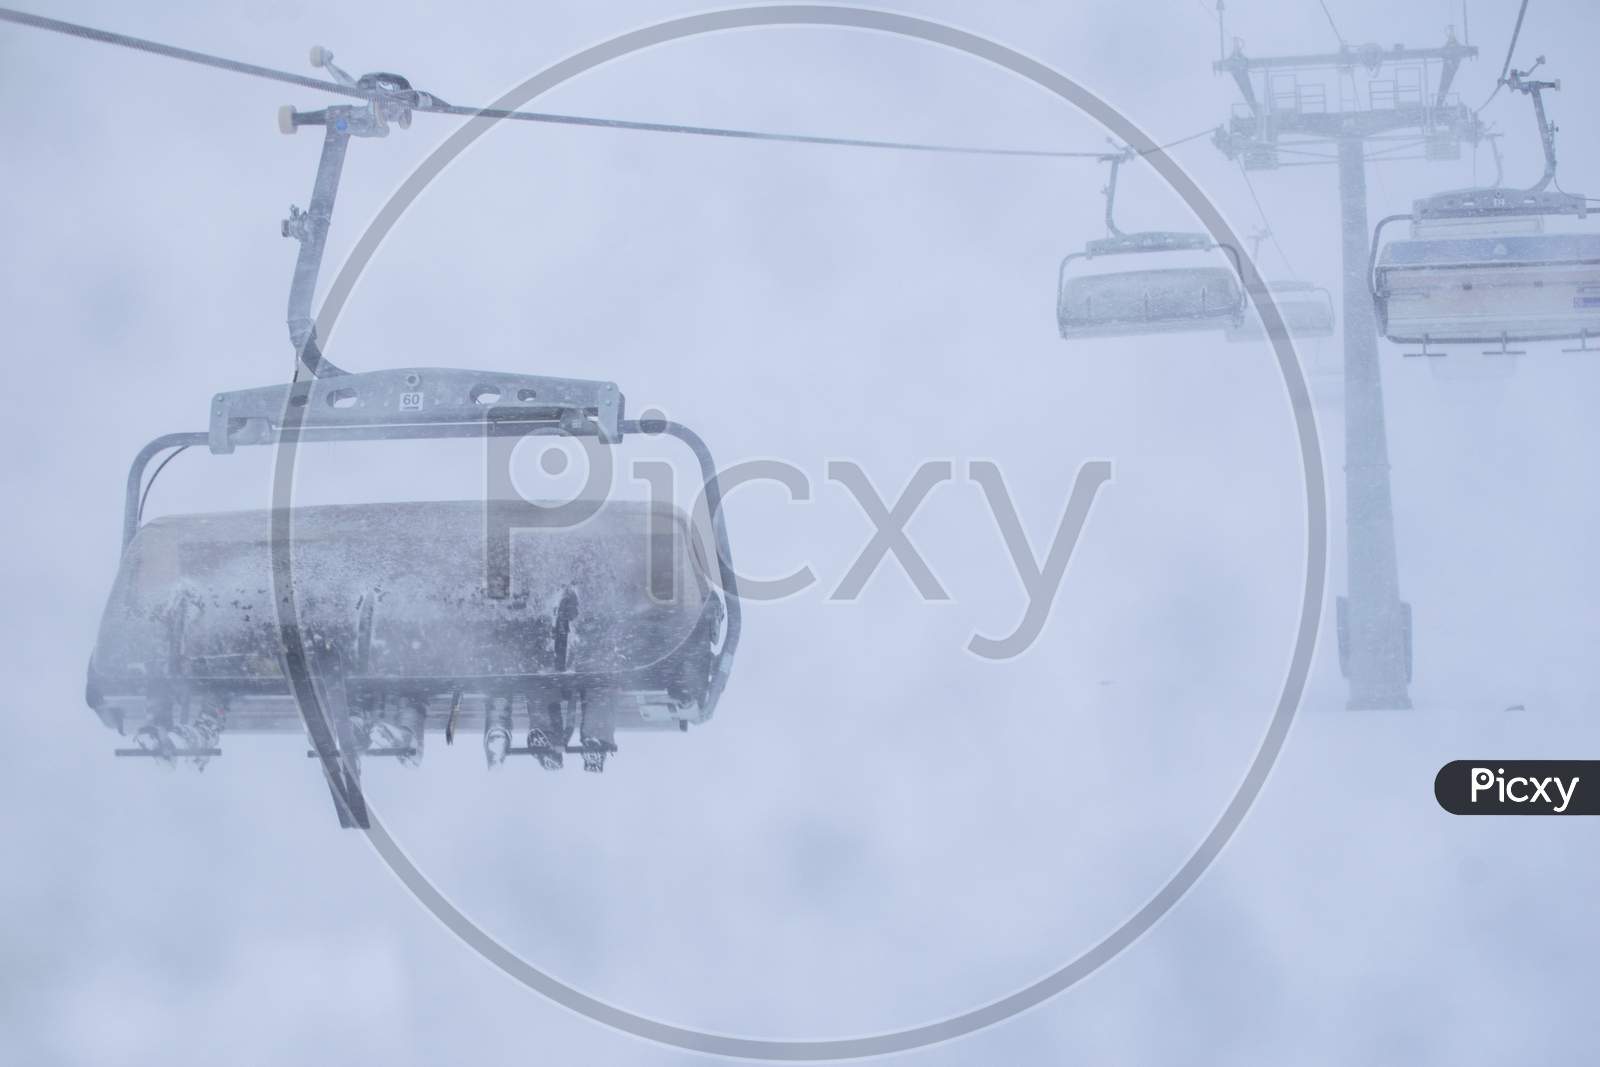 Three Persons In Skis Sit On Ski Resort Chair Lift In Stormy Winter Conditions.Bad Visibility And Weather In Ski Resort Concept.